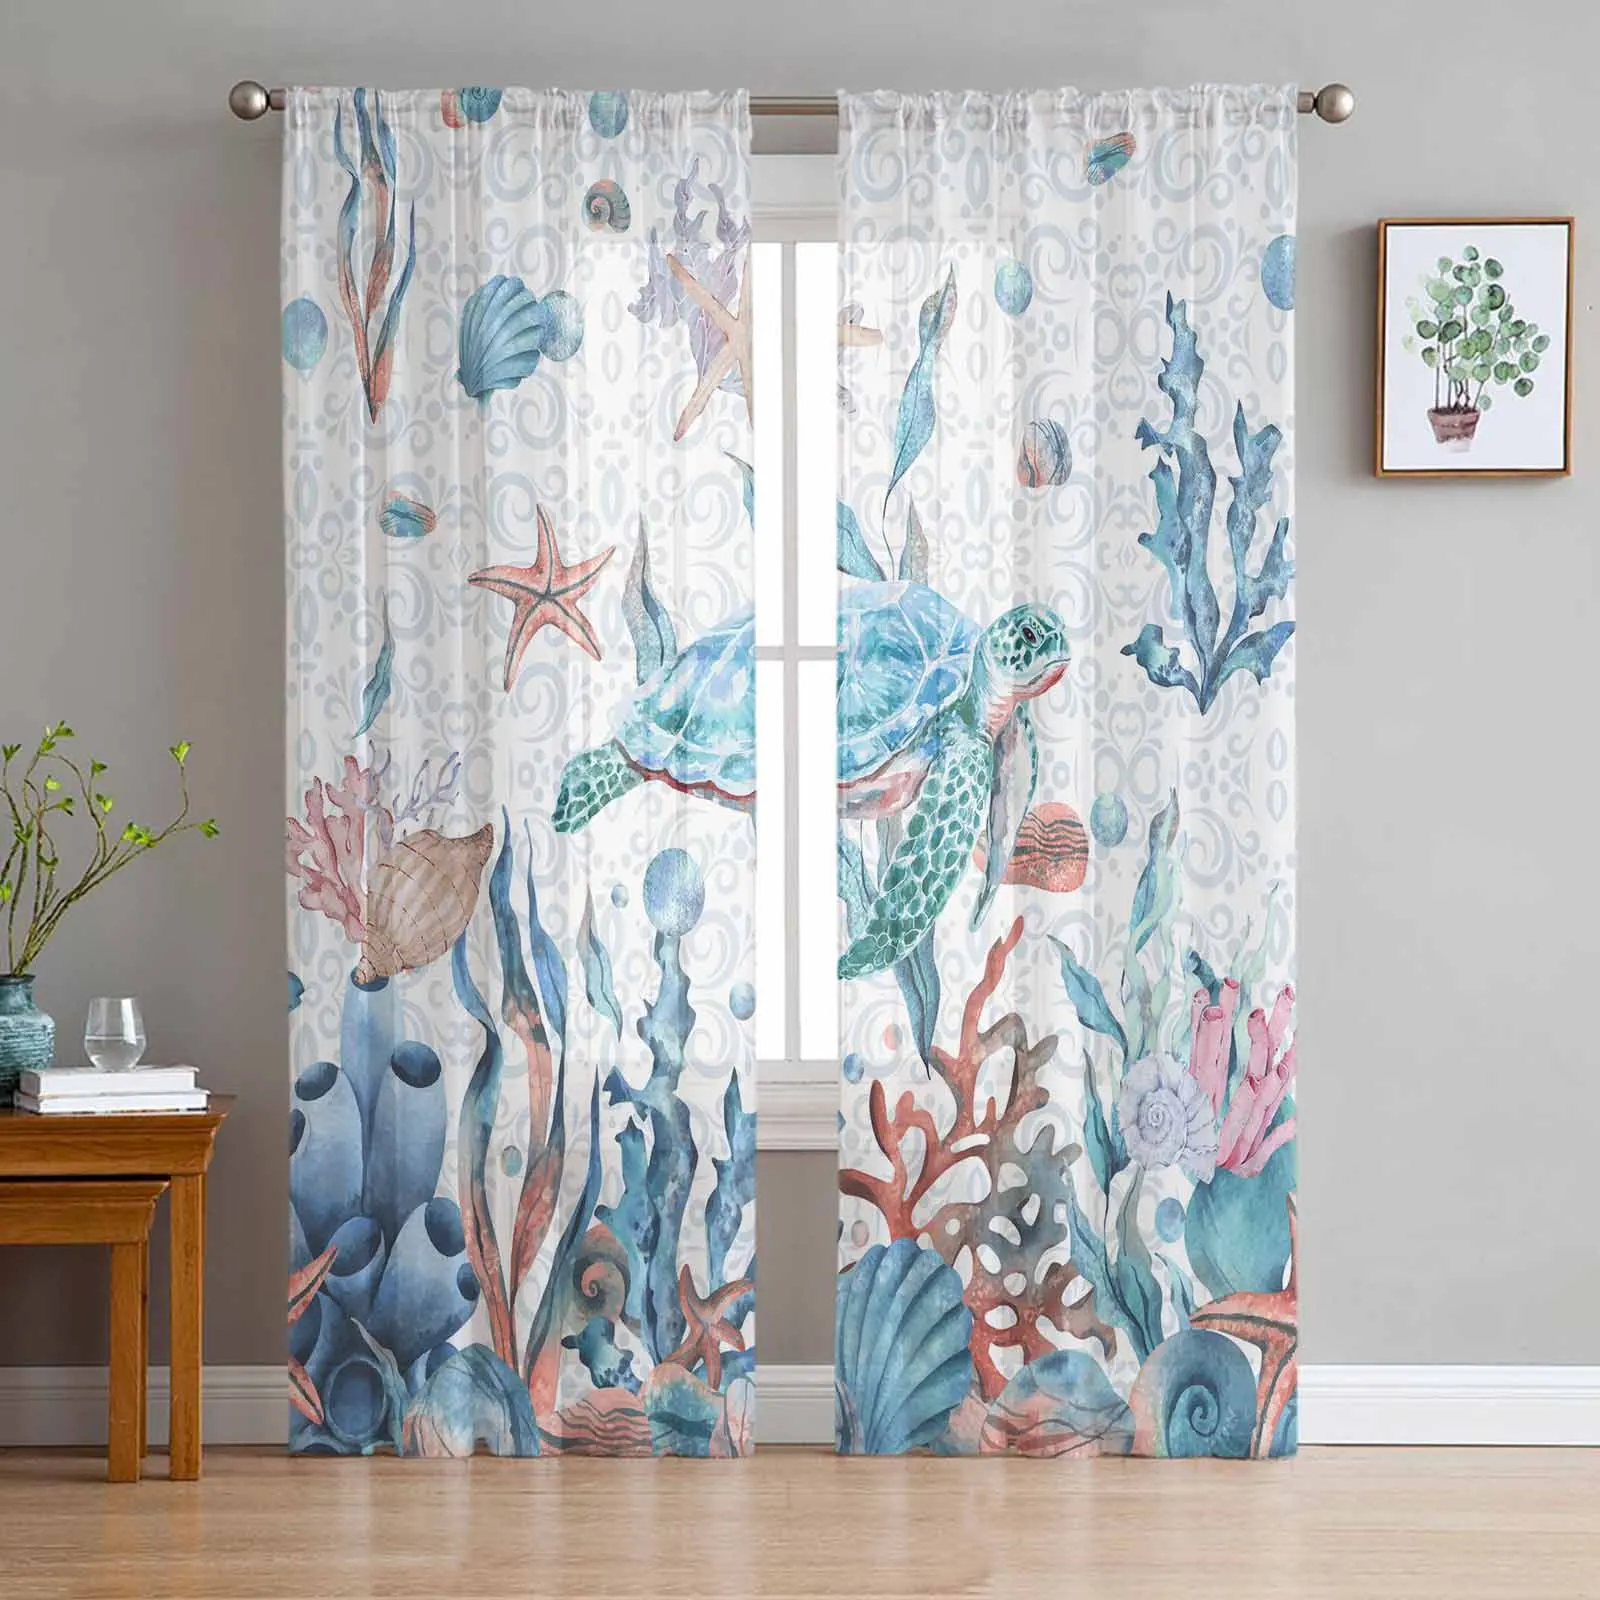 

Summer Watercolor Ocean Shells Turtle Starfish Sheer Curtains for Kids Bedroom Living Room Voile Window Curtains Tulle Drapes